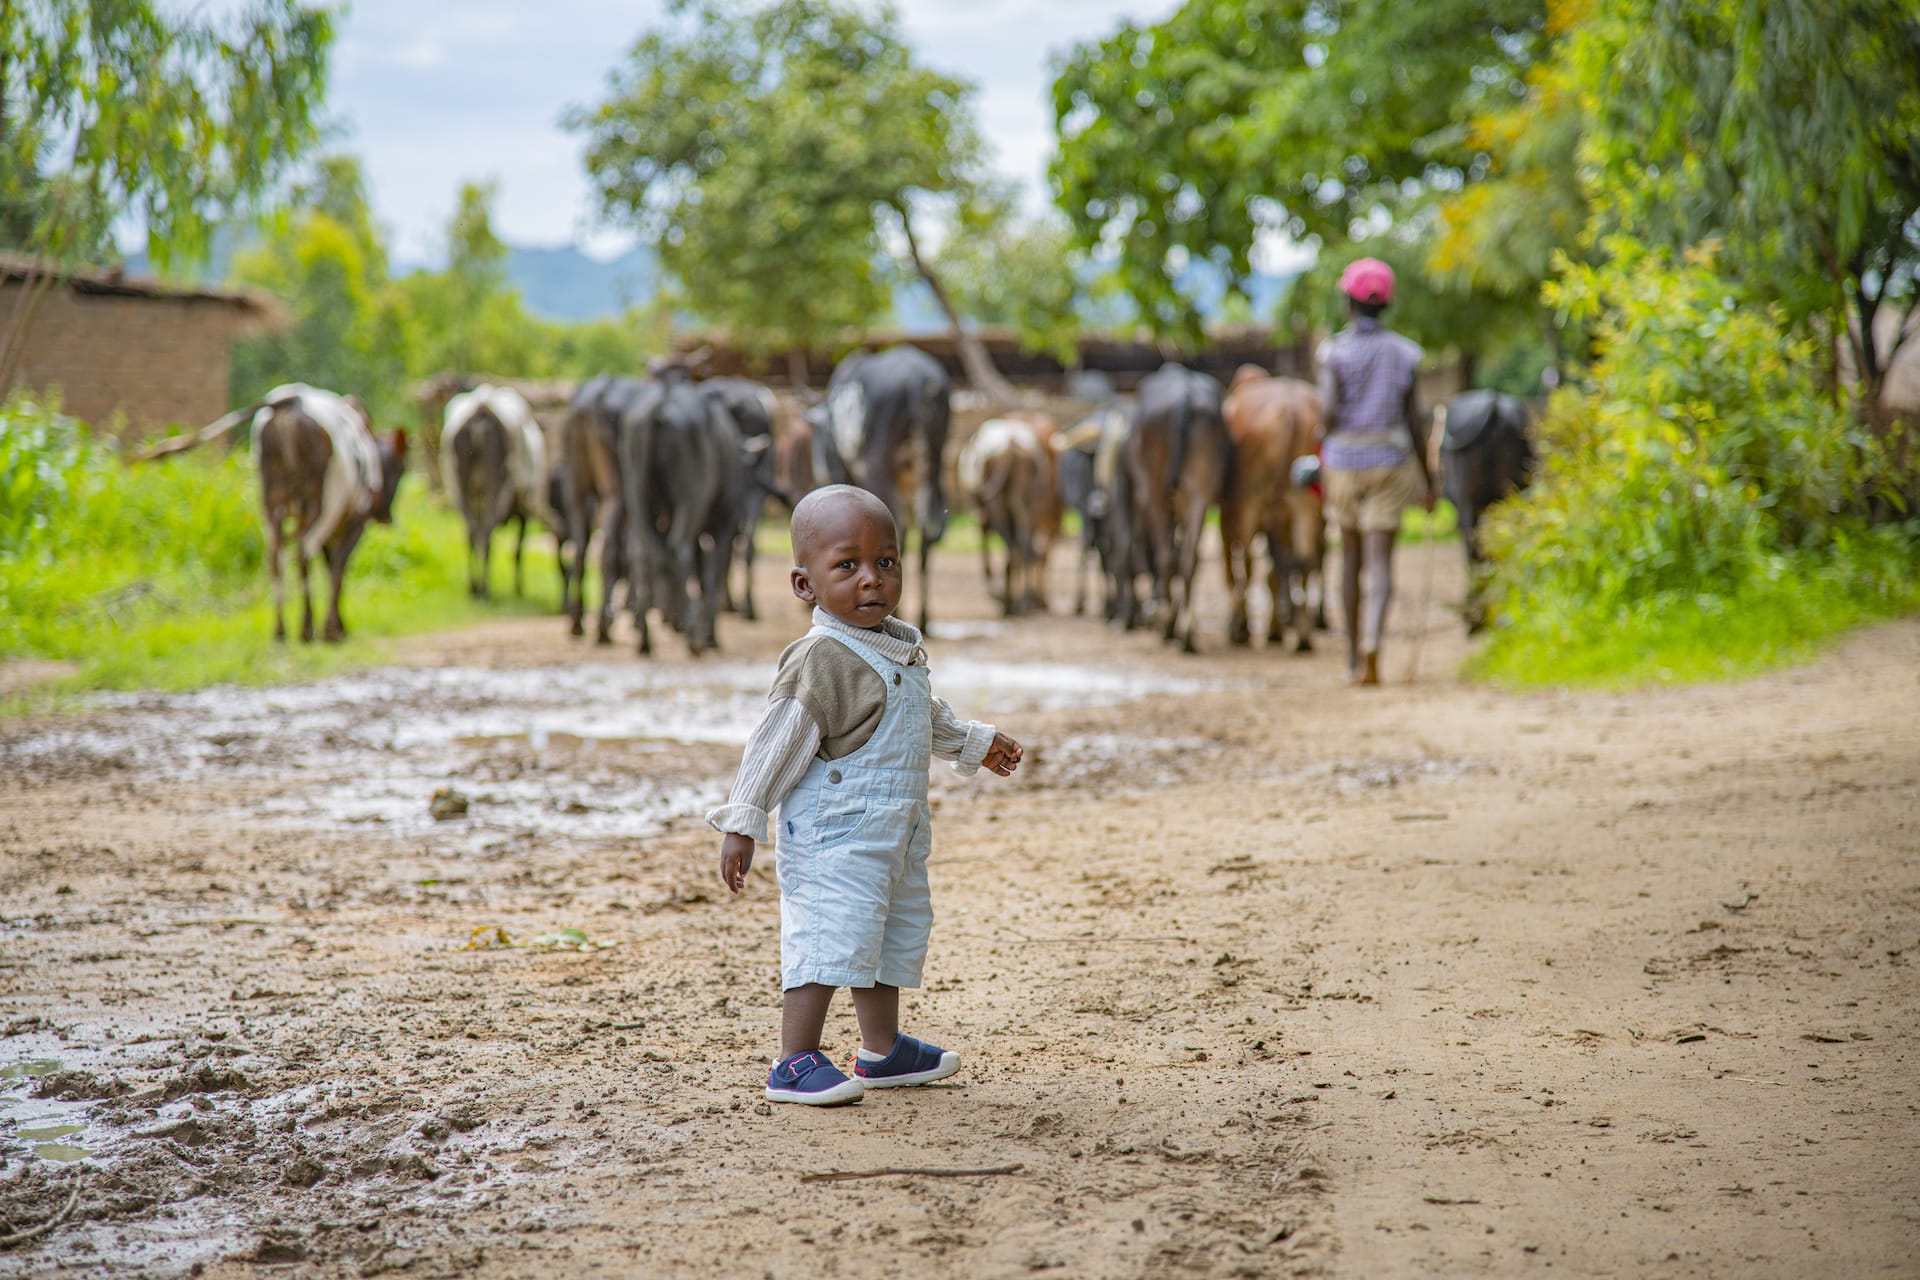 On Compassion registration day, a toddler in Malawi stands on a path, with a group of cattle walking away behind him.